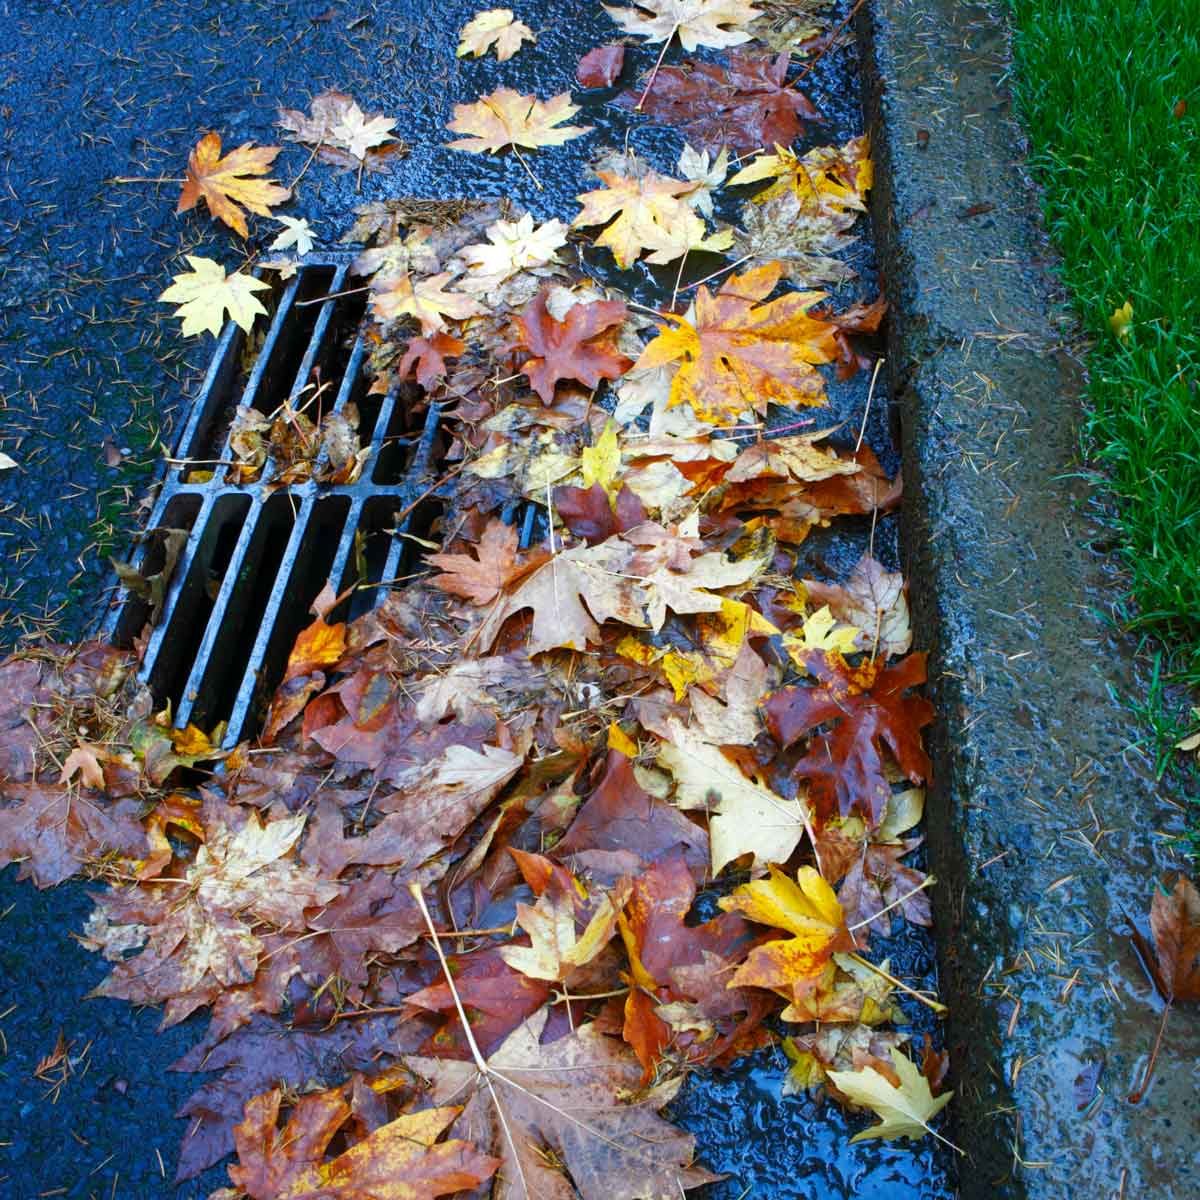 11 Things You Should NOT Do With Your Fallen Leaves